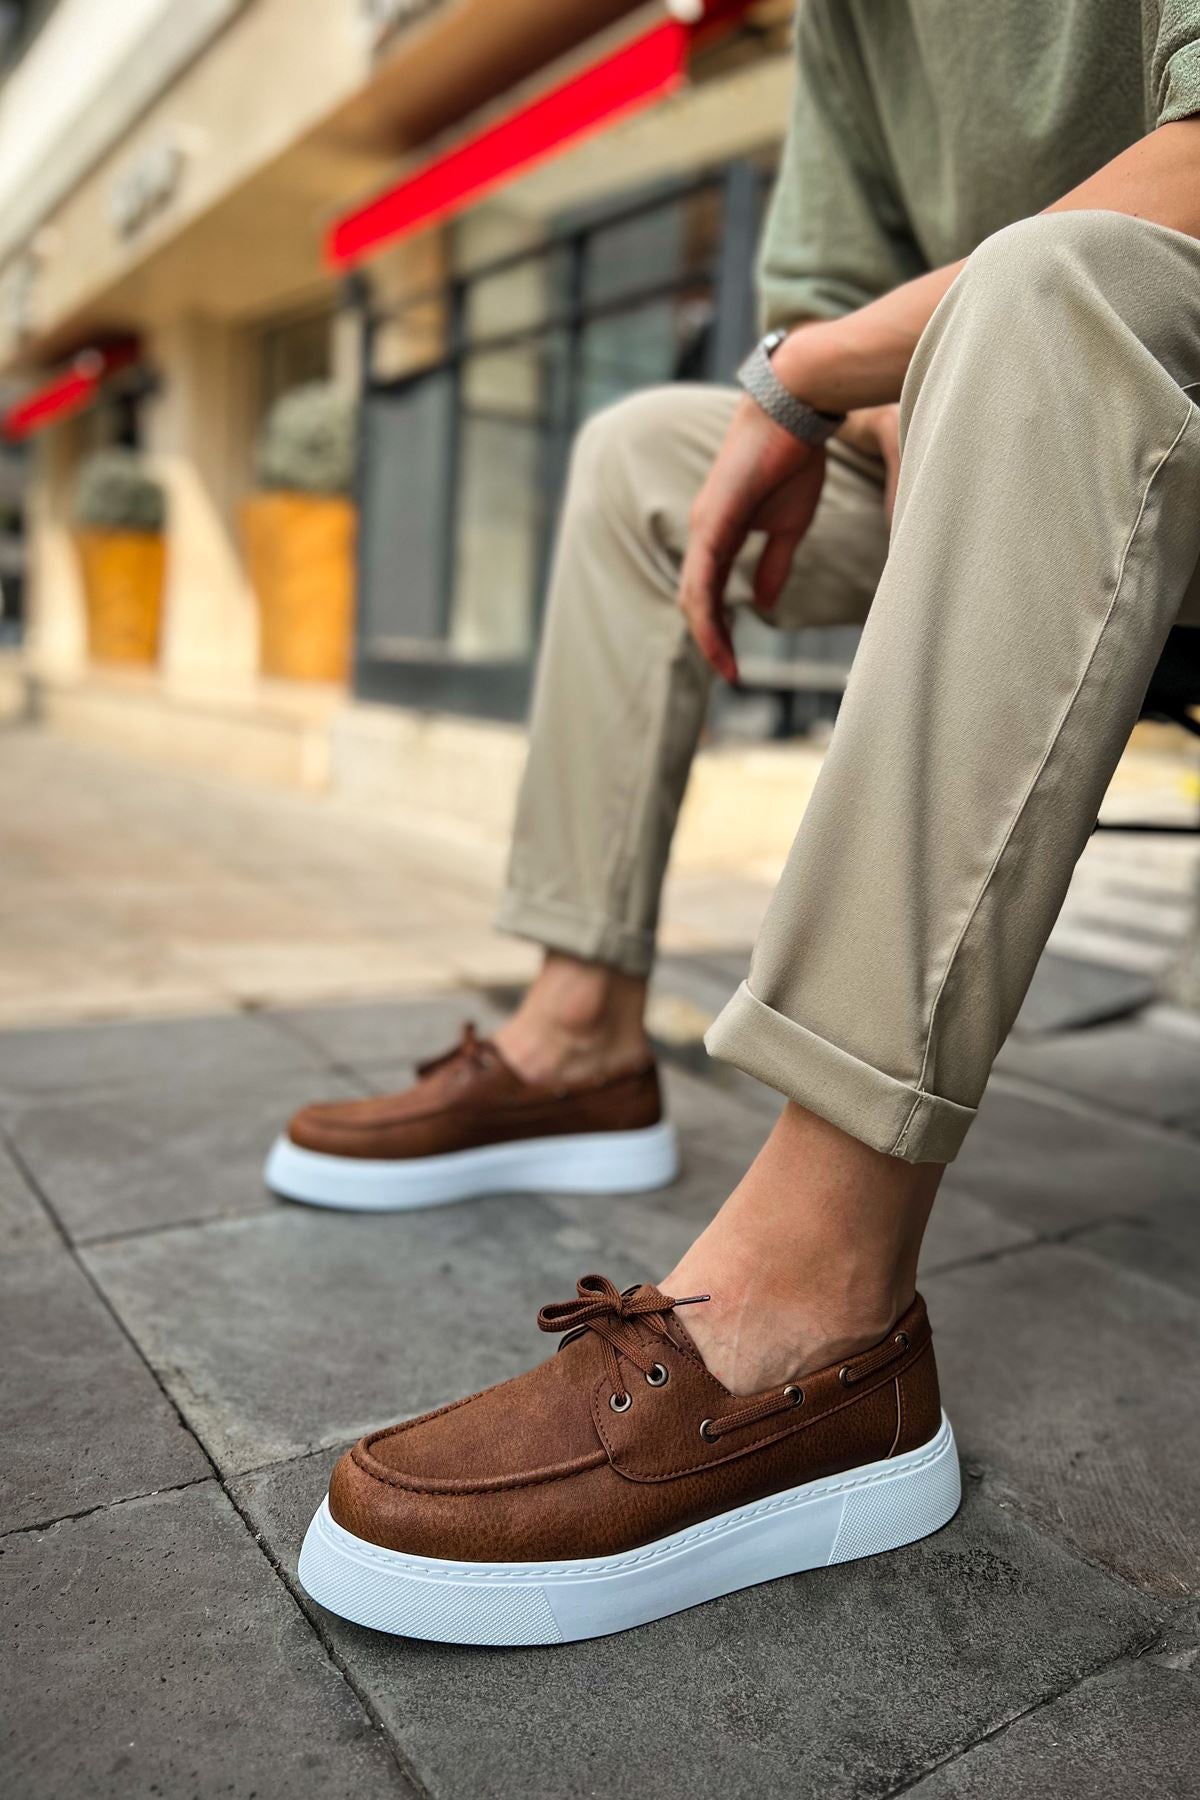 CH419 CBT Torrini Men's Casual Shoes Brown - STREETMODE ™